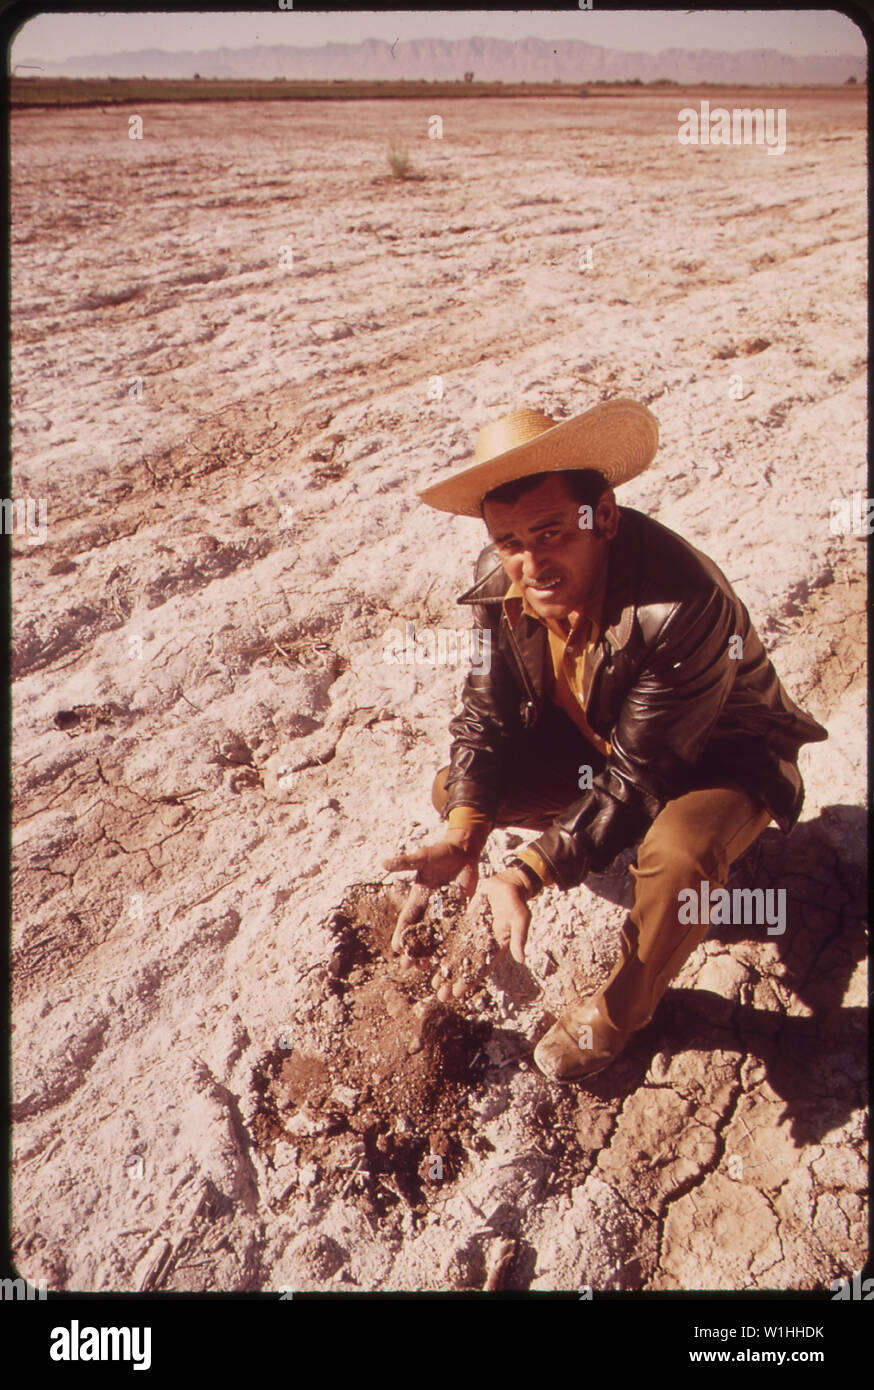 POOR SOIL, DAMAGED BY ACCUMULATED SALT, IS EXAMINED BY MEXICAN FARMER, GILBERTO BUITIERREZ BANAGA, NEAR MEXICALI, MEXICO MEXICANS WANT BETTER QUALITY WATER FROM COLORADO RIVER PRESENTLY SALT CONTENT IS EXTREMELY HIGH AT MEXICAN BORDER Stock Photo